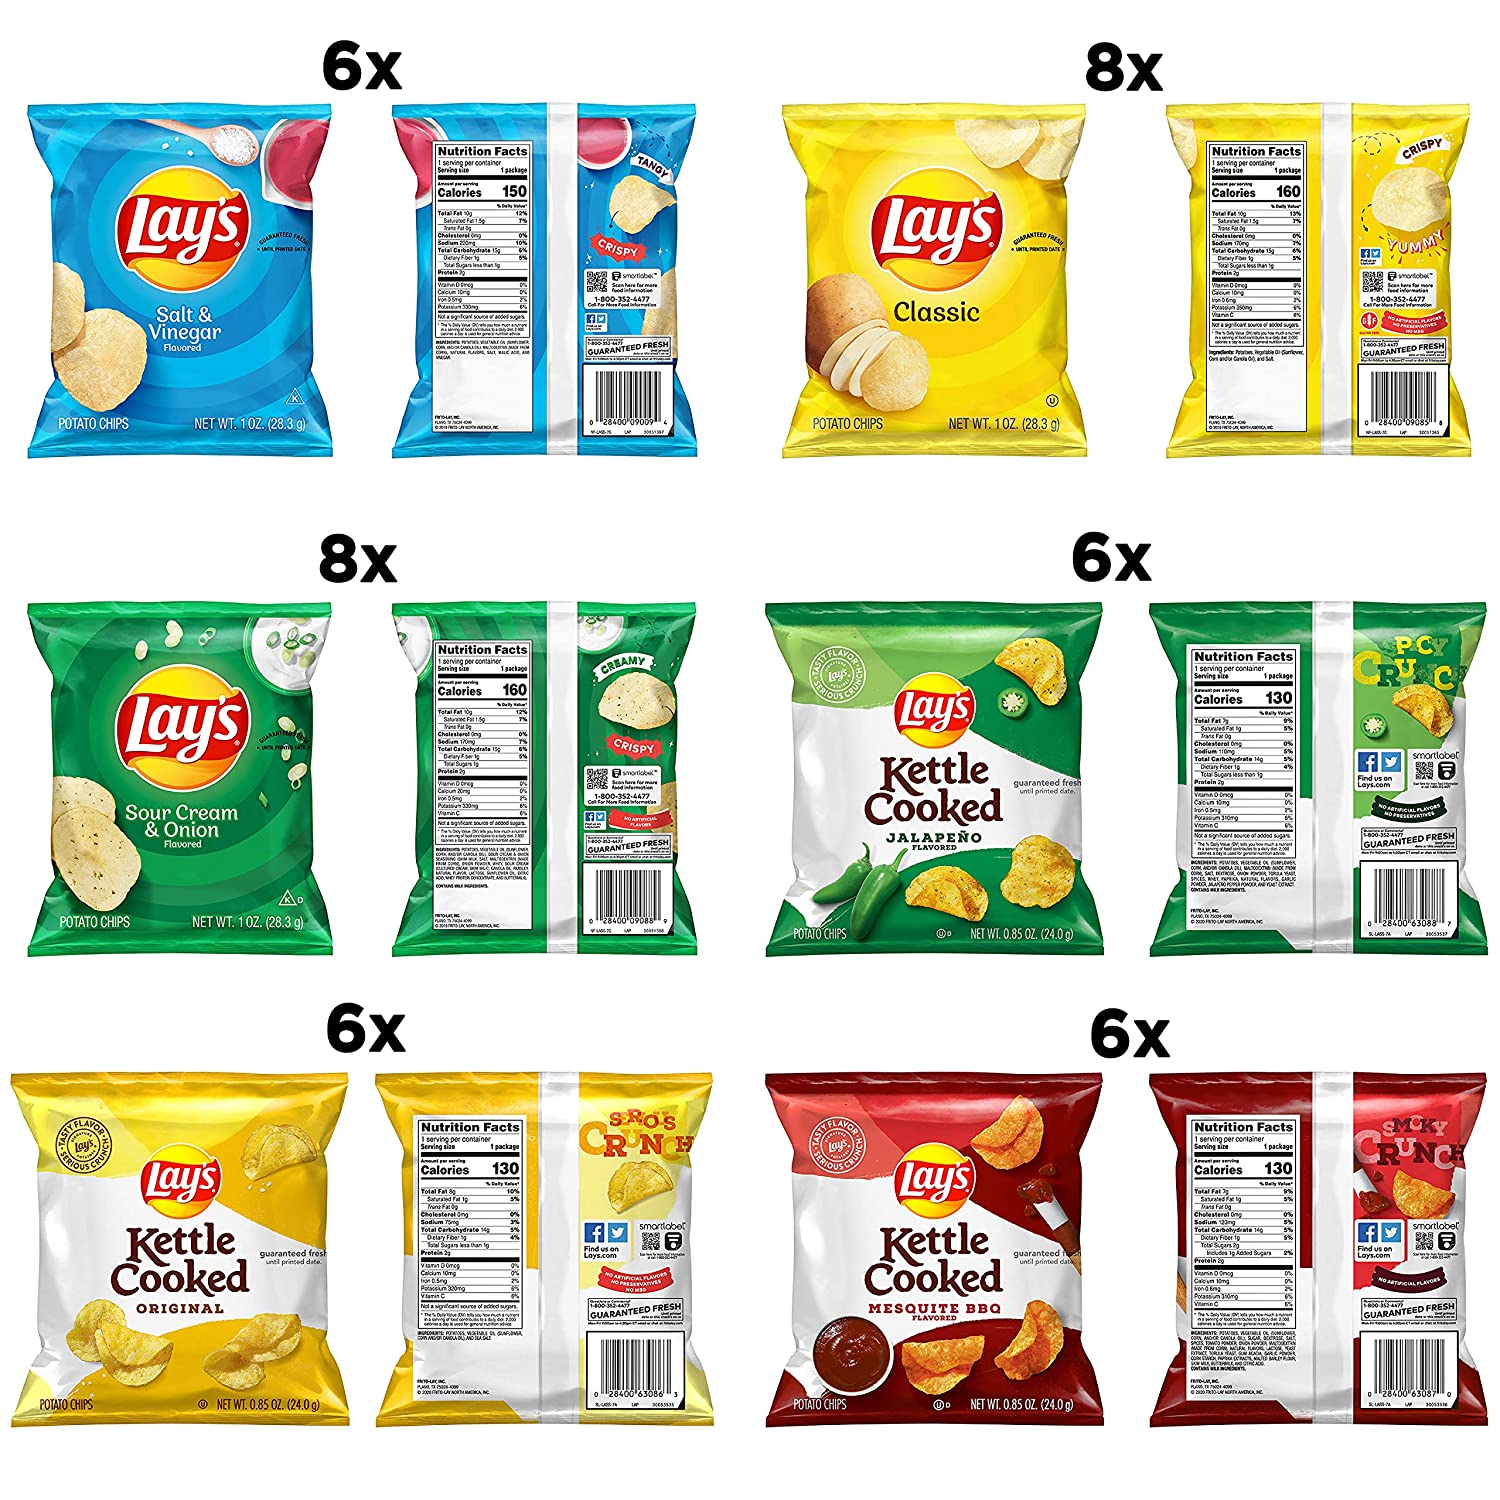 Lay's and Lay's Kettle Cooked Potato Chips Variety Pack, (40 Count)